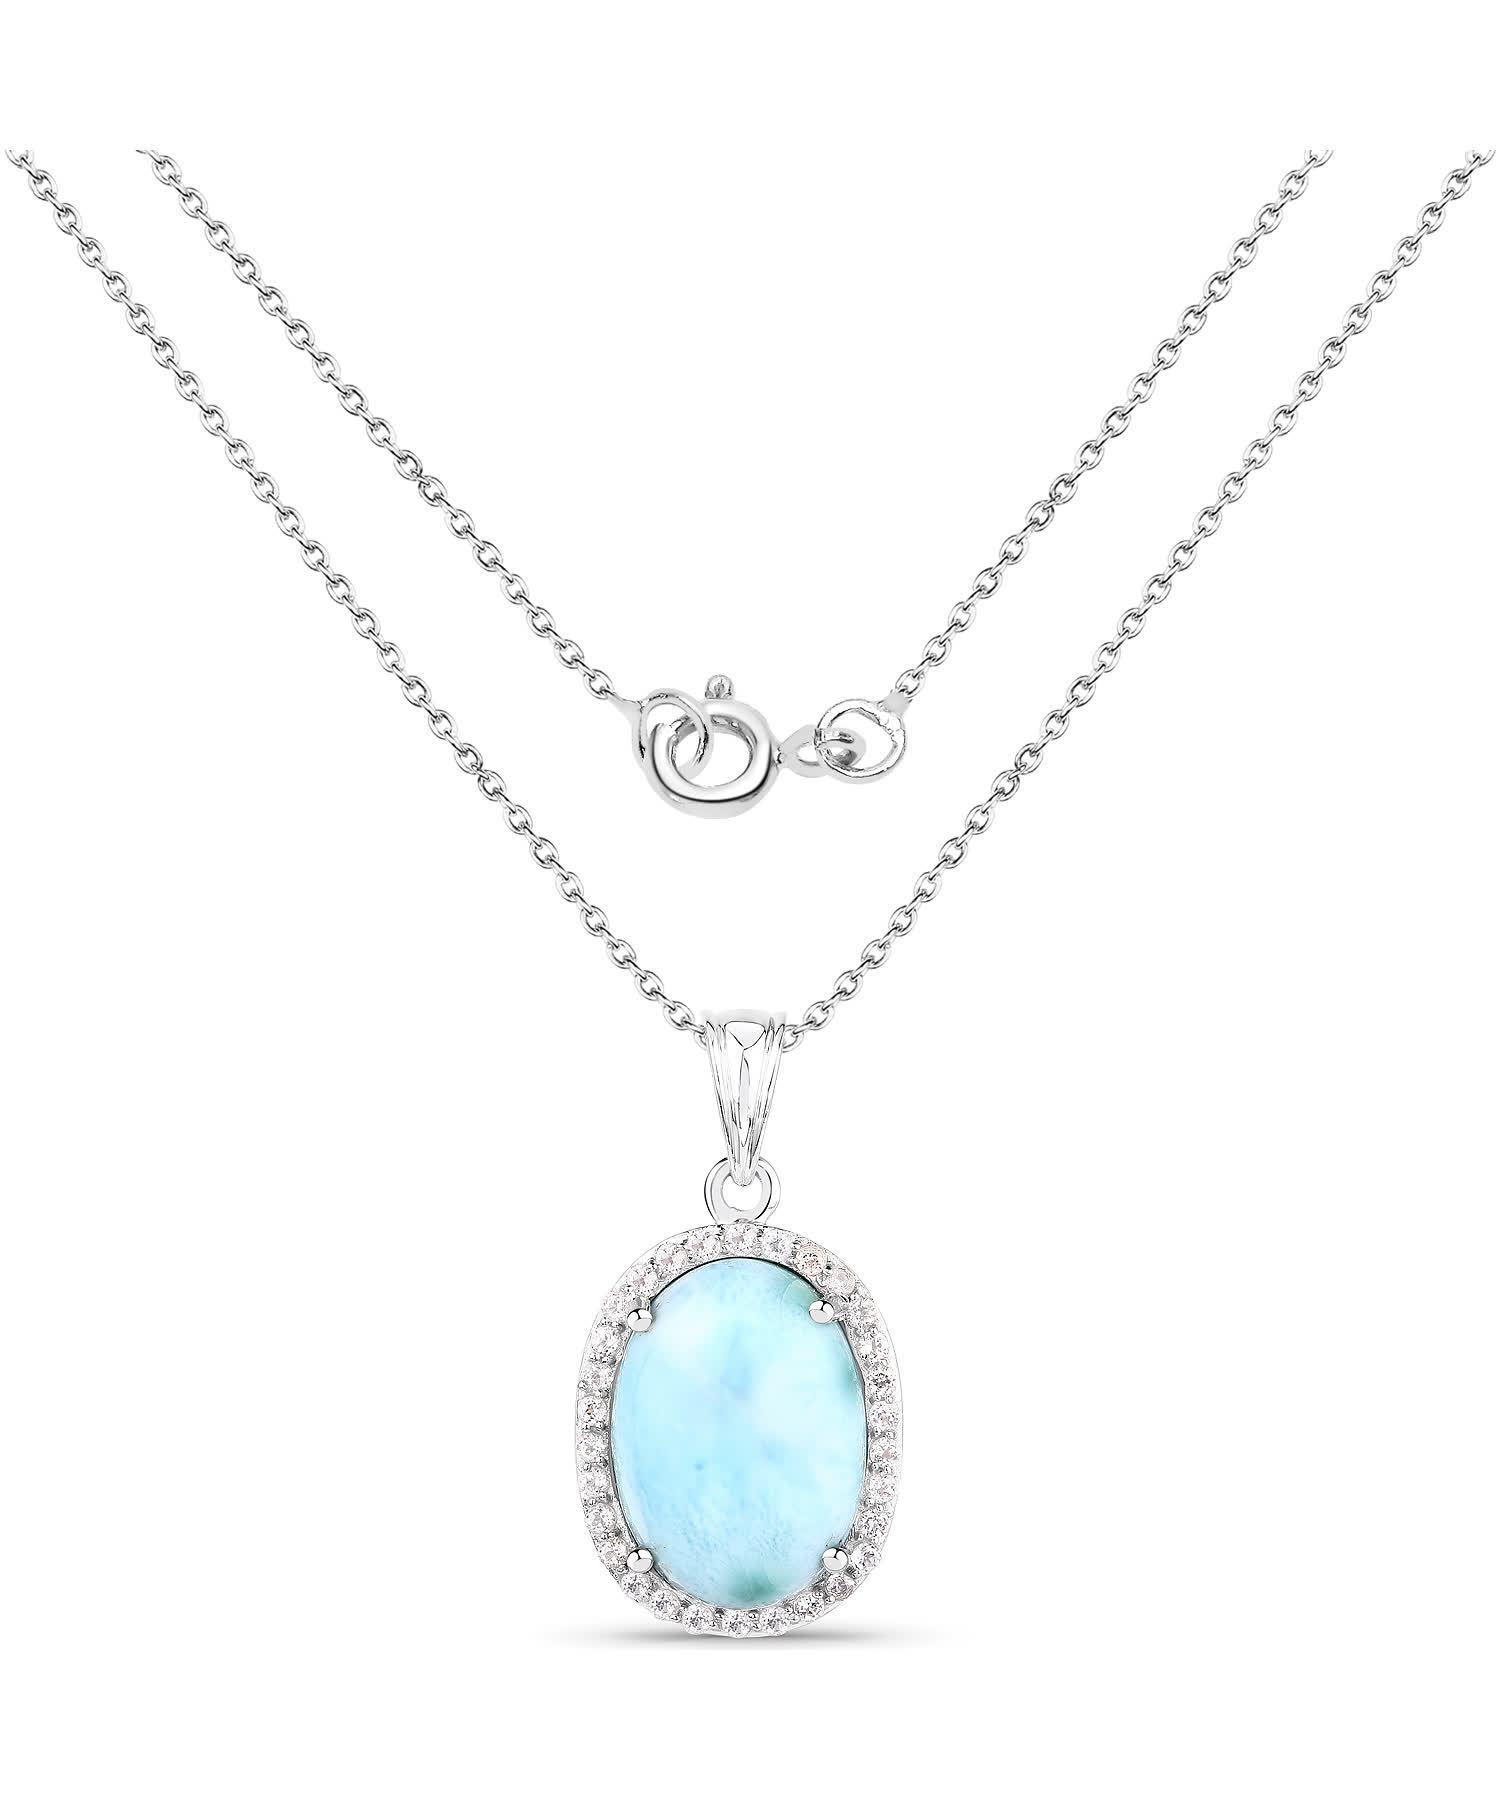 13.55ctw Natural Larimar and Topaz Rhodium Plated 925 Sterling Silver Halo Pendant With Chain View 2